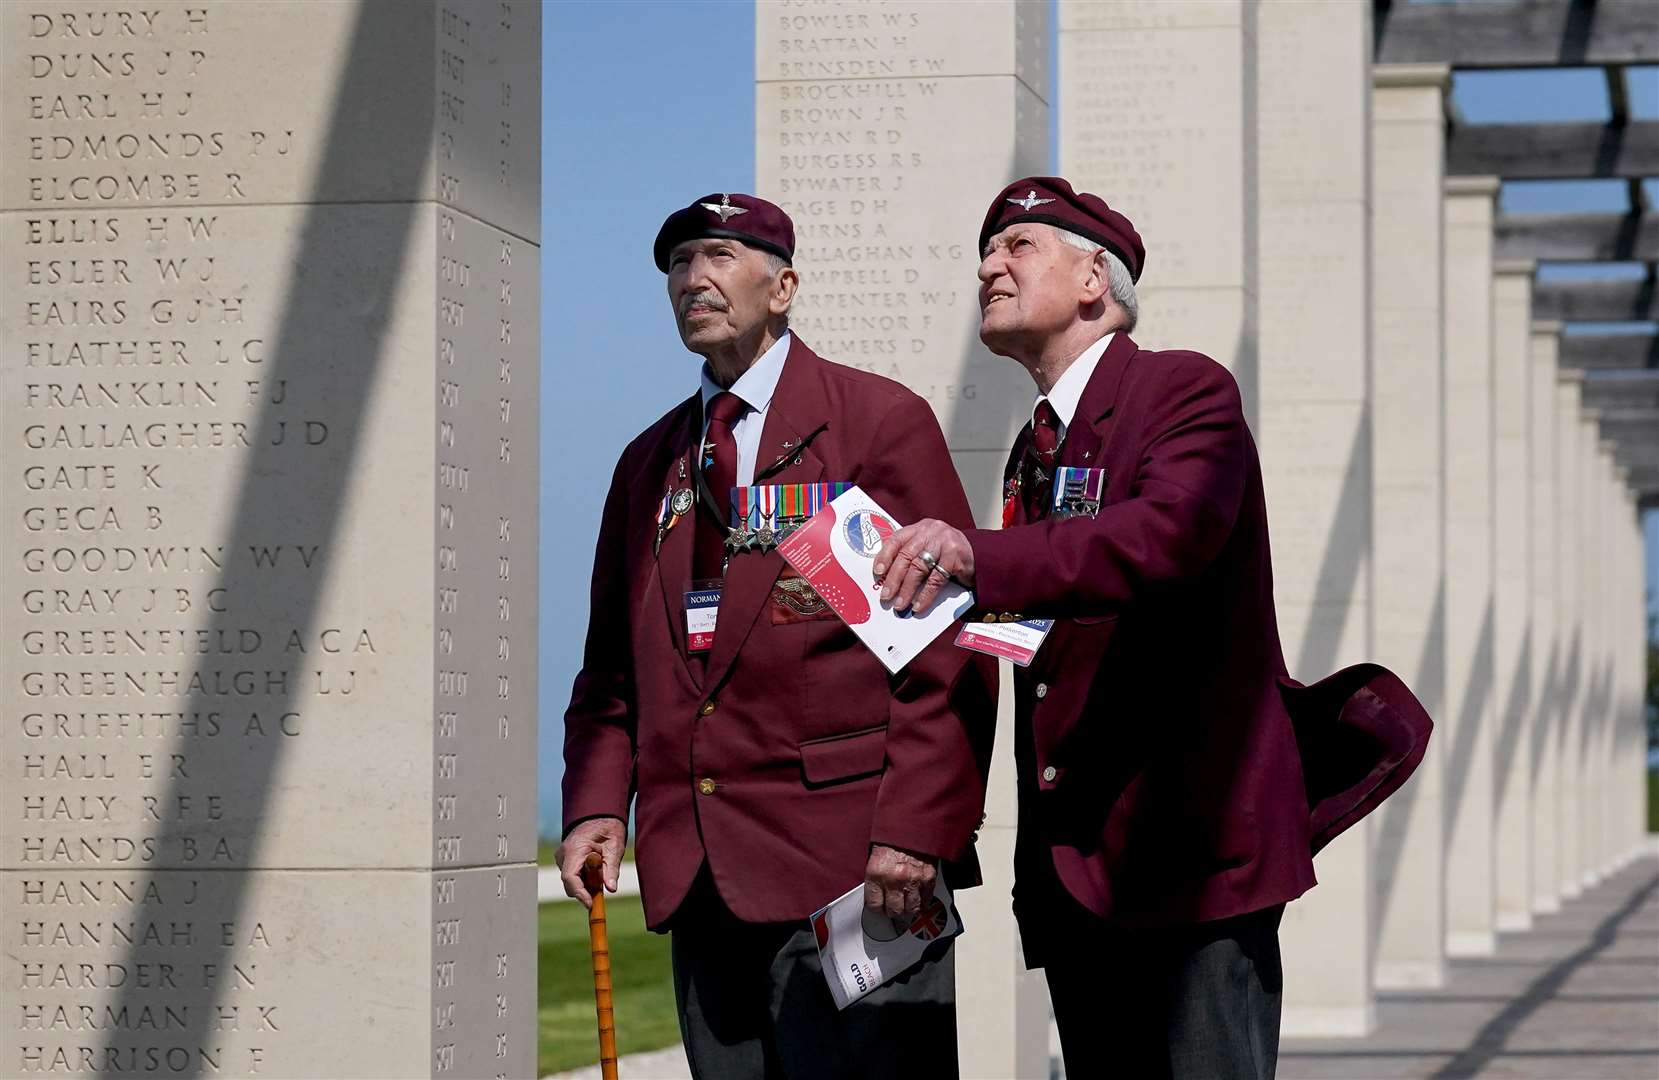 D-Day veteran Tom Schaffer, left, and his companion John Pinkerton study the names on the British Normandy Memorial at Ver-sur-Mer in France (PA)